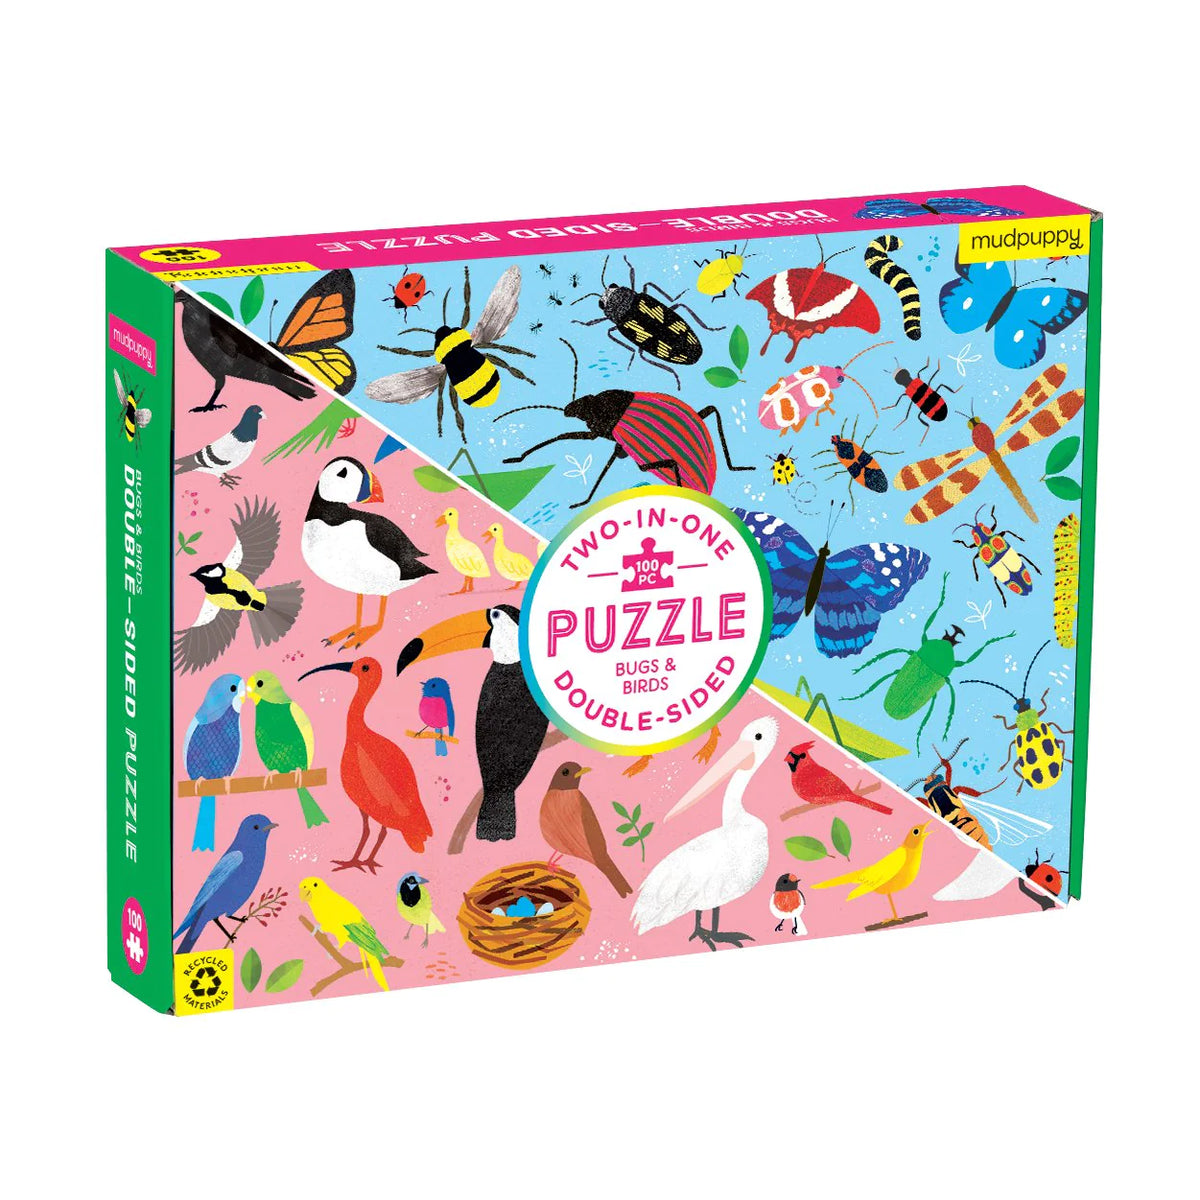 Bugs & Birds Double-sided Puzzle Cover